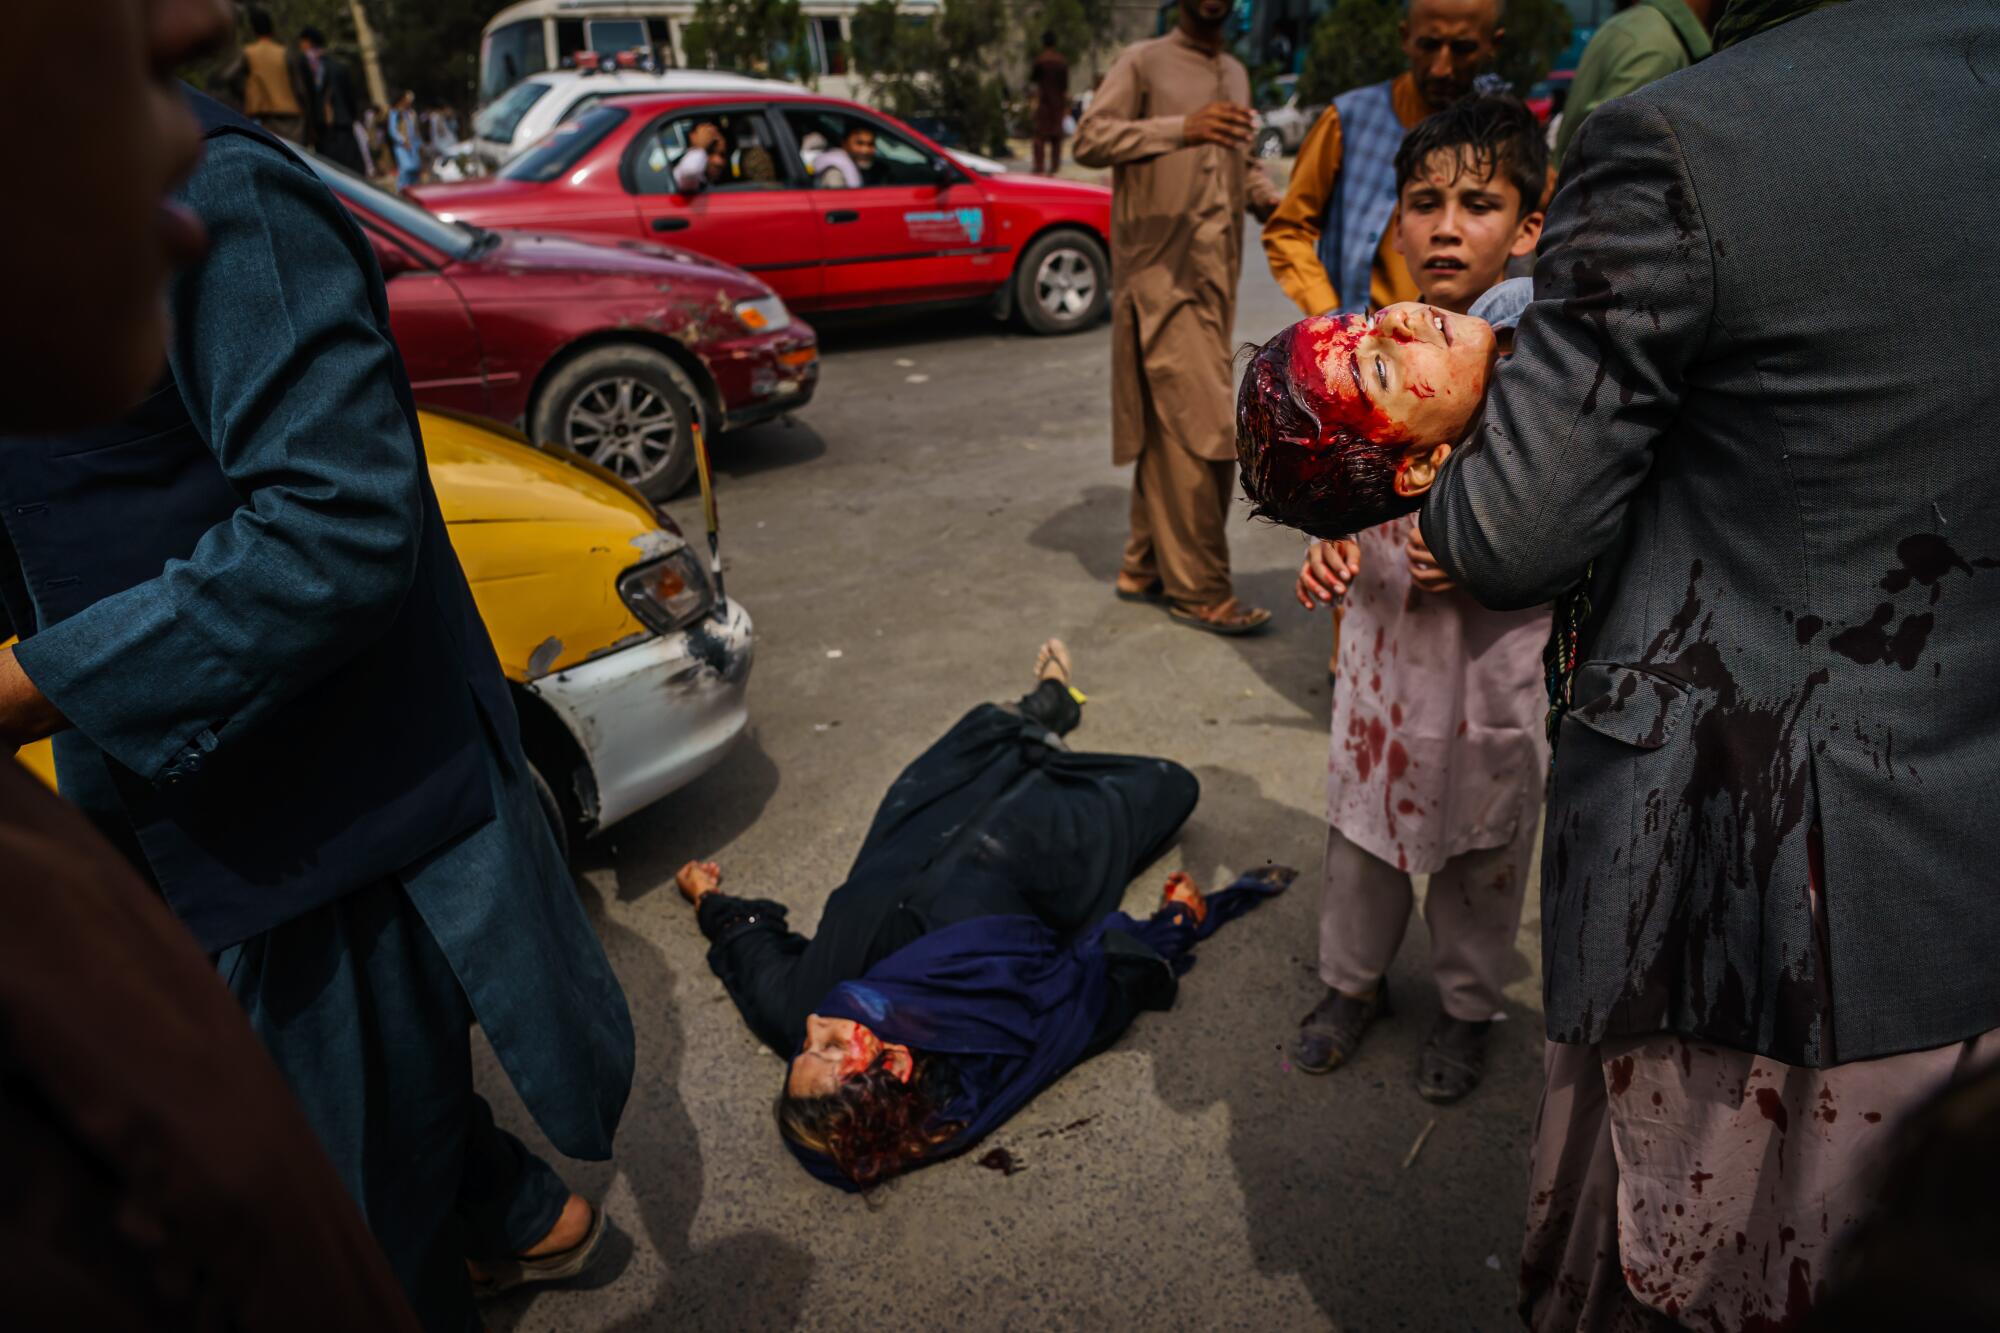 A man carries a bloodied child, as a woman lies wounded on the street 